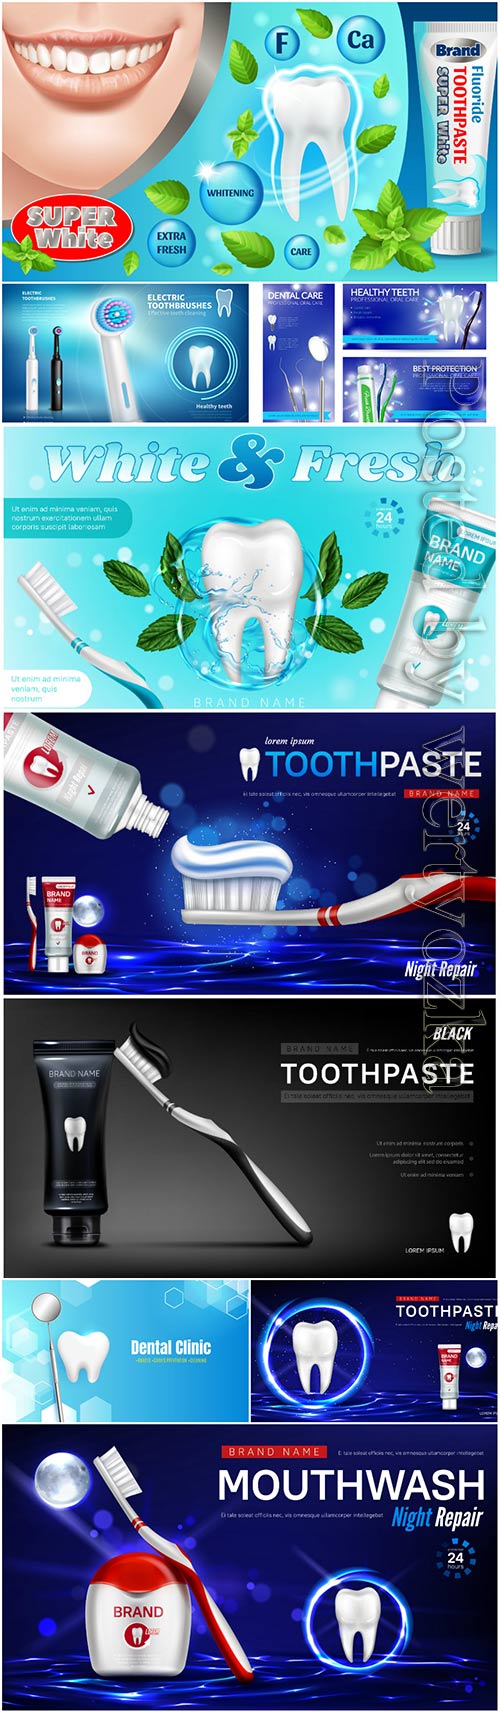 Toothpaste advertising vector posters, dentistry